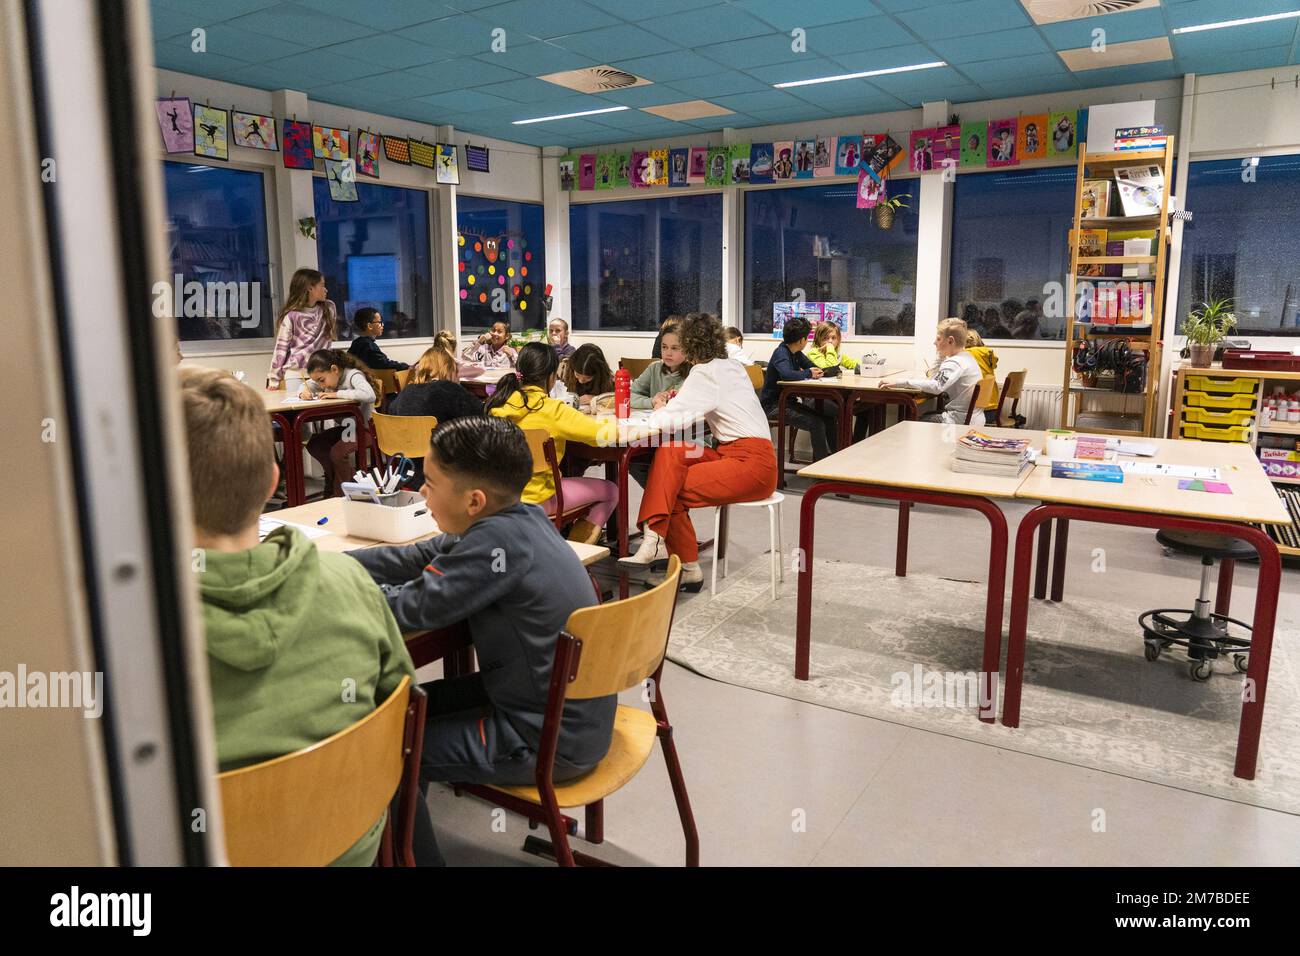 VLEUTEN - Students of primary school Zonneworld during the first day of school in the new year. Primary and secondary schools will start again after the Christmas holidays. ANP JEROEN JUMELET netherlands out - belgium out Stock Photo